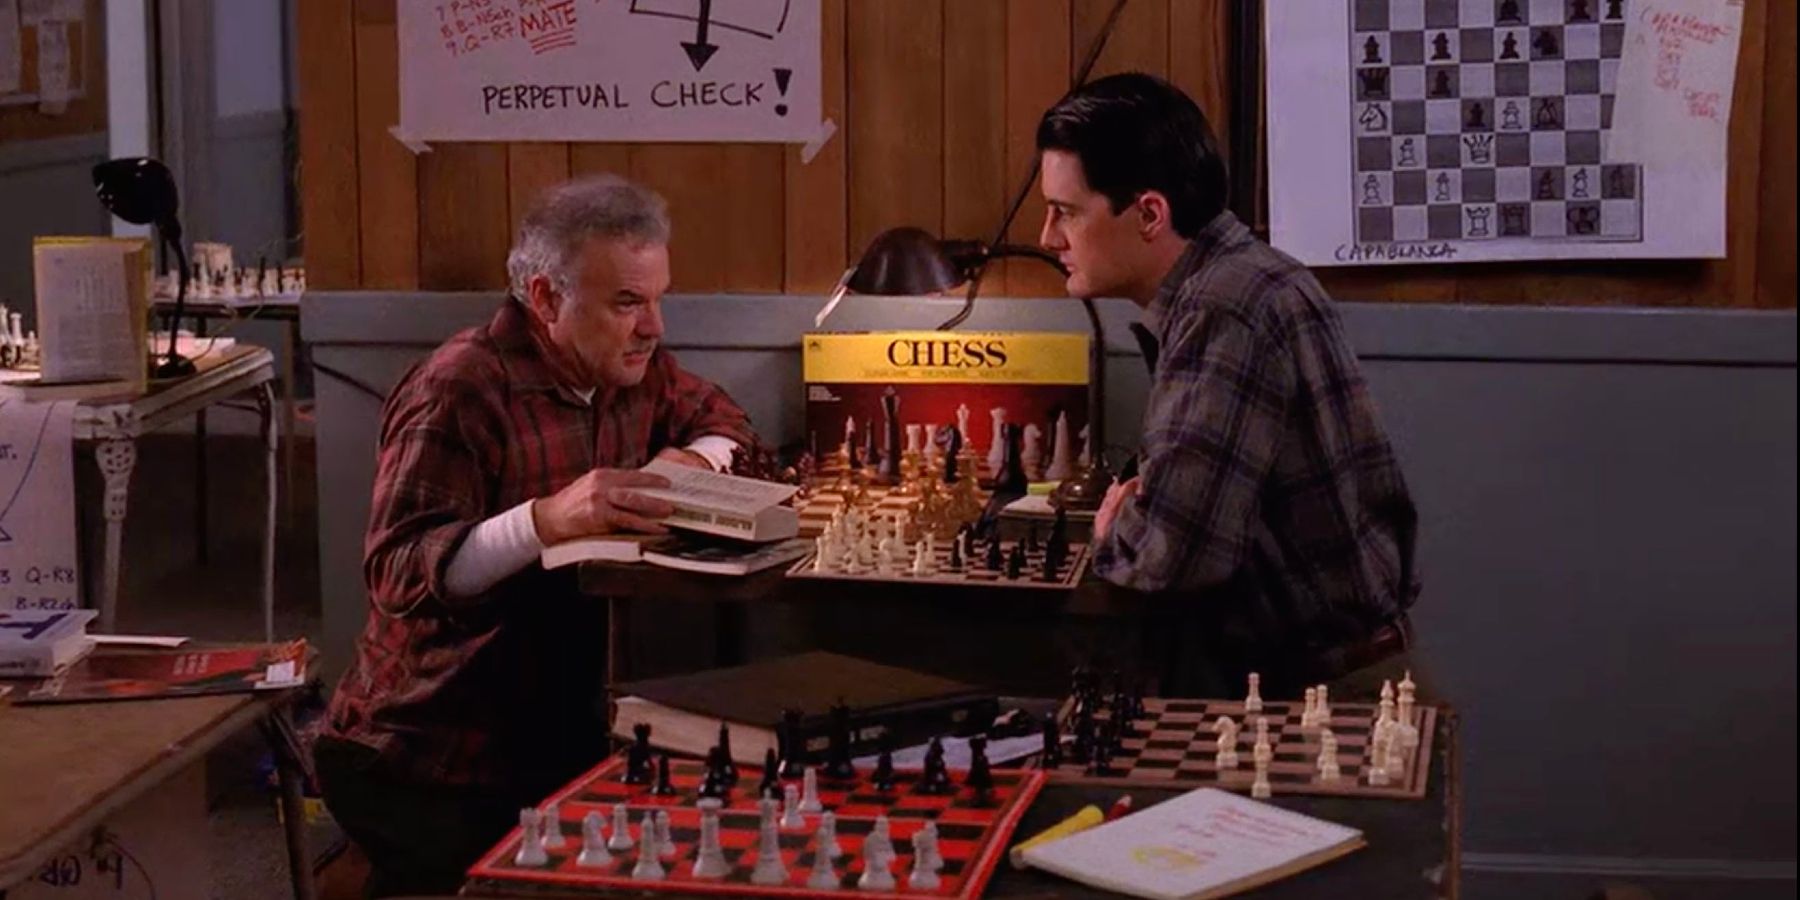 Twin Peaks Jack Nance's Pete Martell play chess with Kyla Maclachlan's Dale Cooper